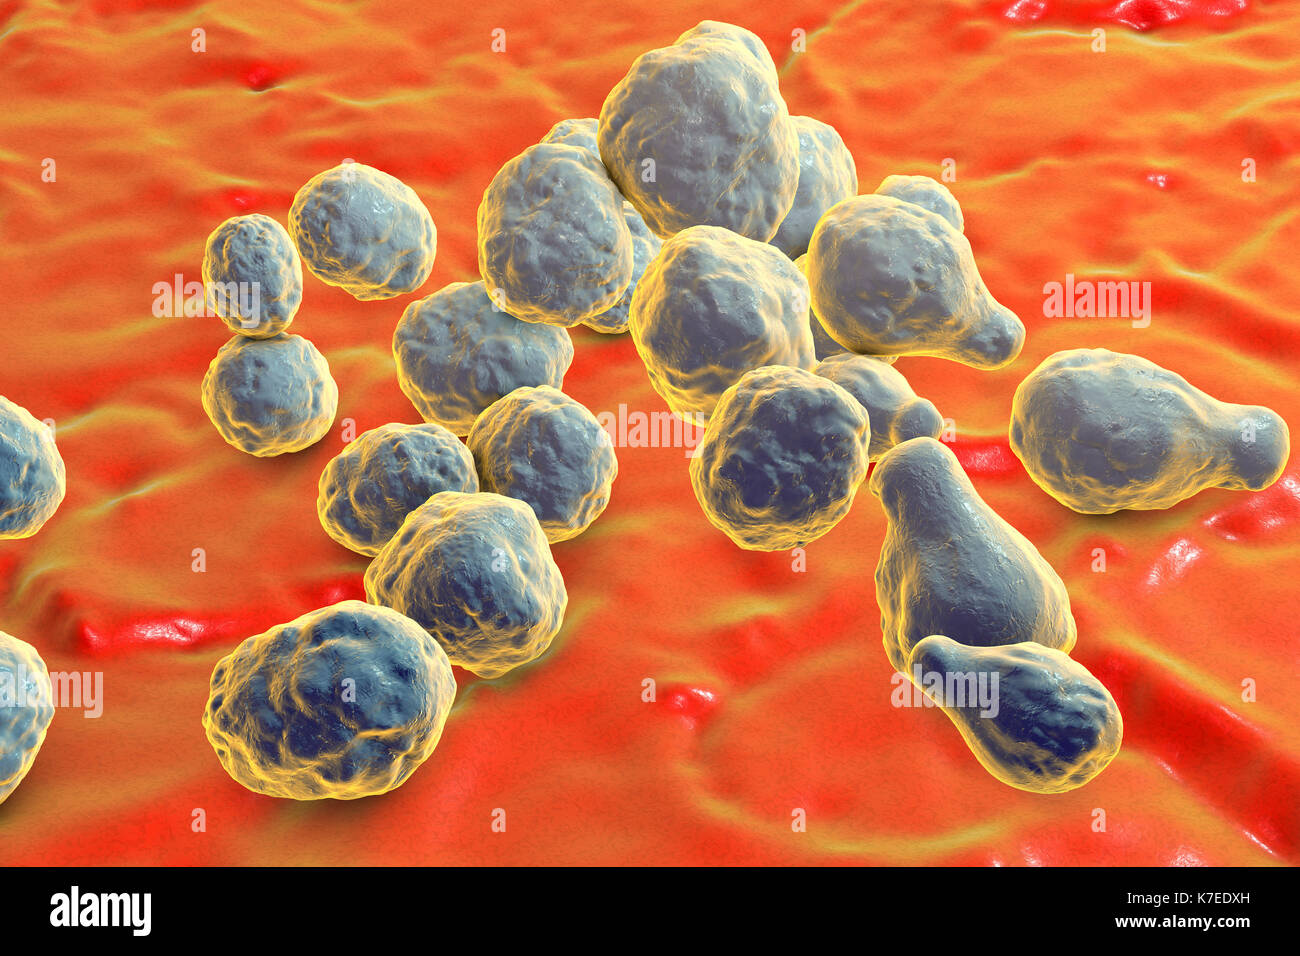 Cryptococcus neoformans fungus, computer illustration. C. neoformans is a yeast-like fungus that reproduces by budding. An acidic mucopolysaccharide capsule completely encloses the fungus. It can cause the disease cryptococcosis, especially in immune deficient patients, such as those with HIV/AIDS (acquired immunodeficiency syndrome). It can infect the brain, causing meningitis or brain abscesses, lungs or skin. The most common clinical form is meningoencephalitis. It is caused by inhaling the fungus from soil that has been contaminated by pigeon droppings. Stock Photo